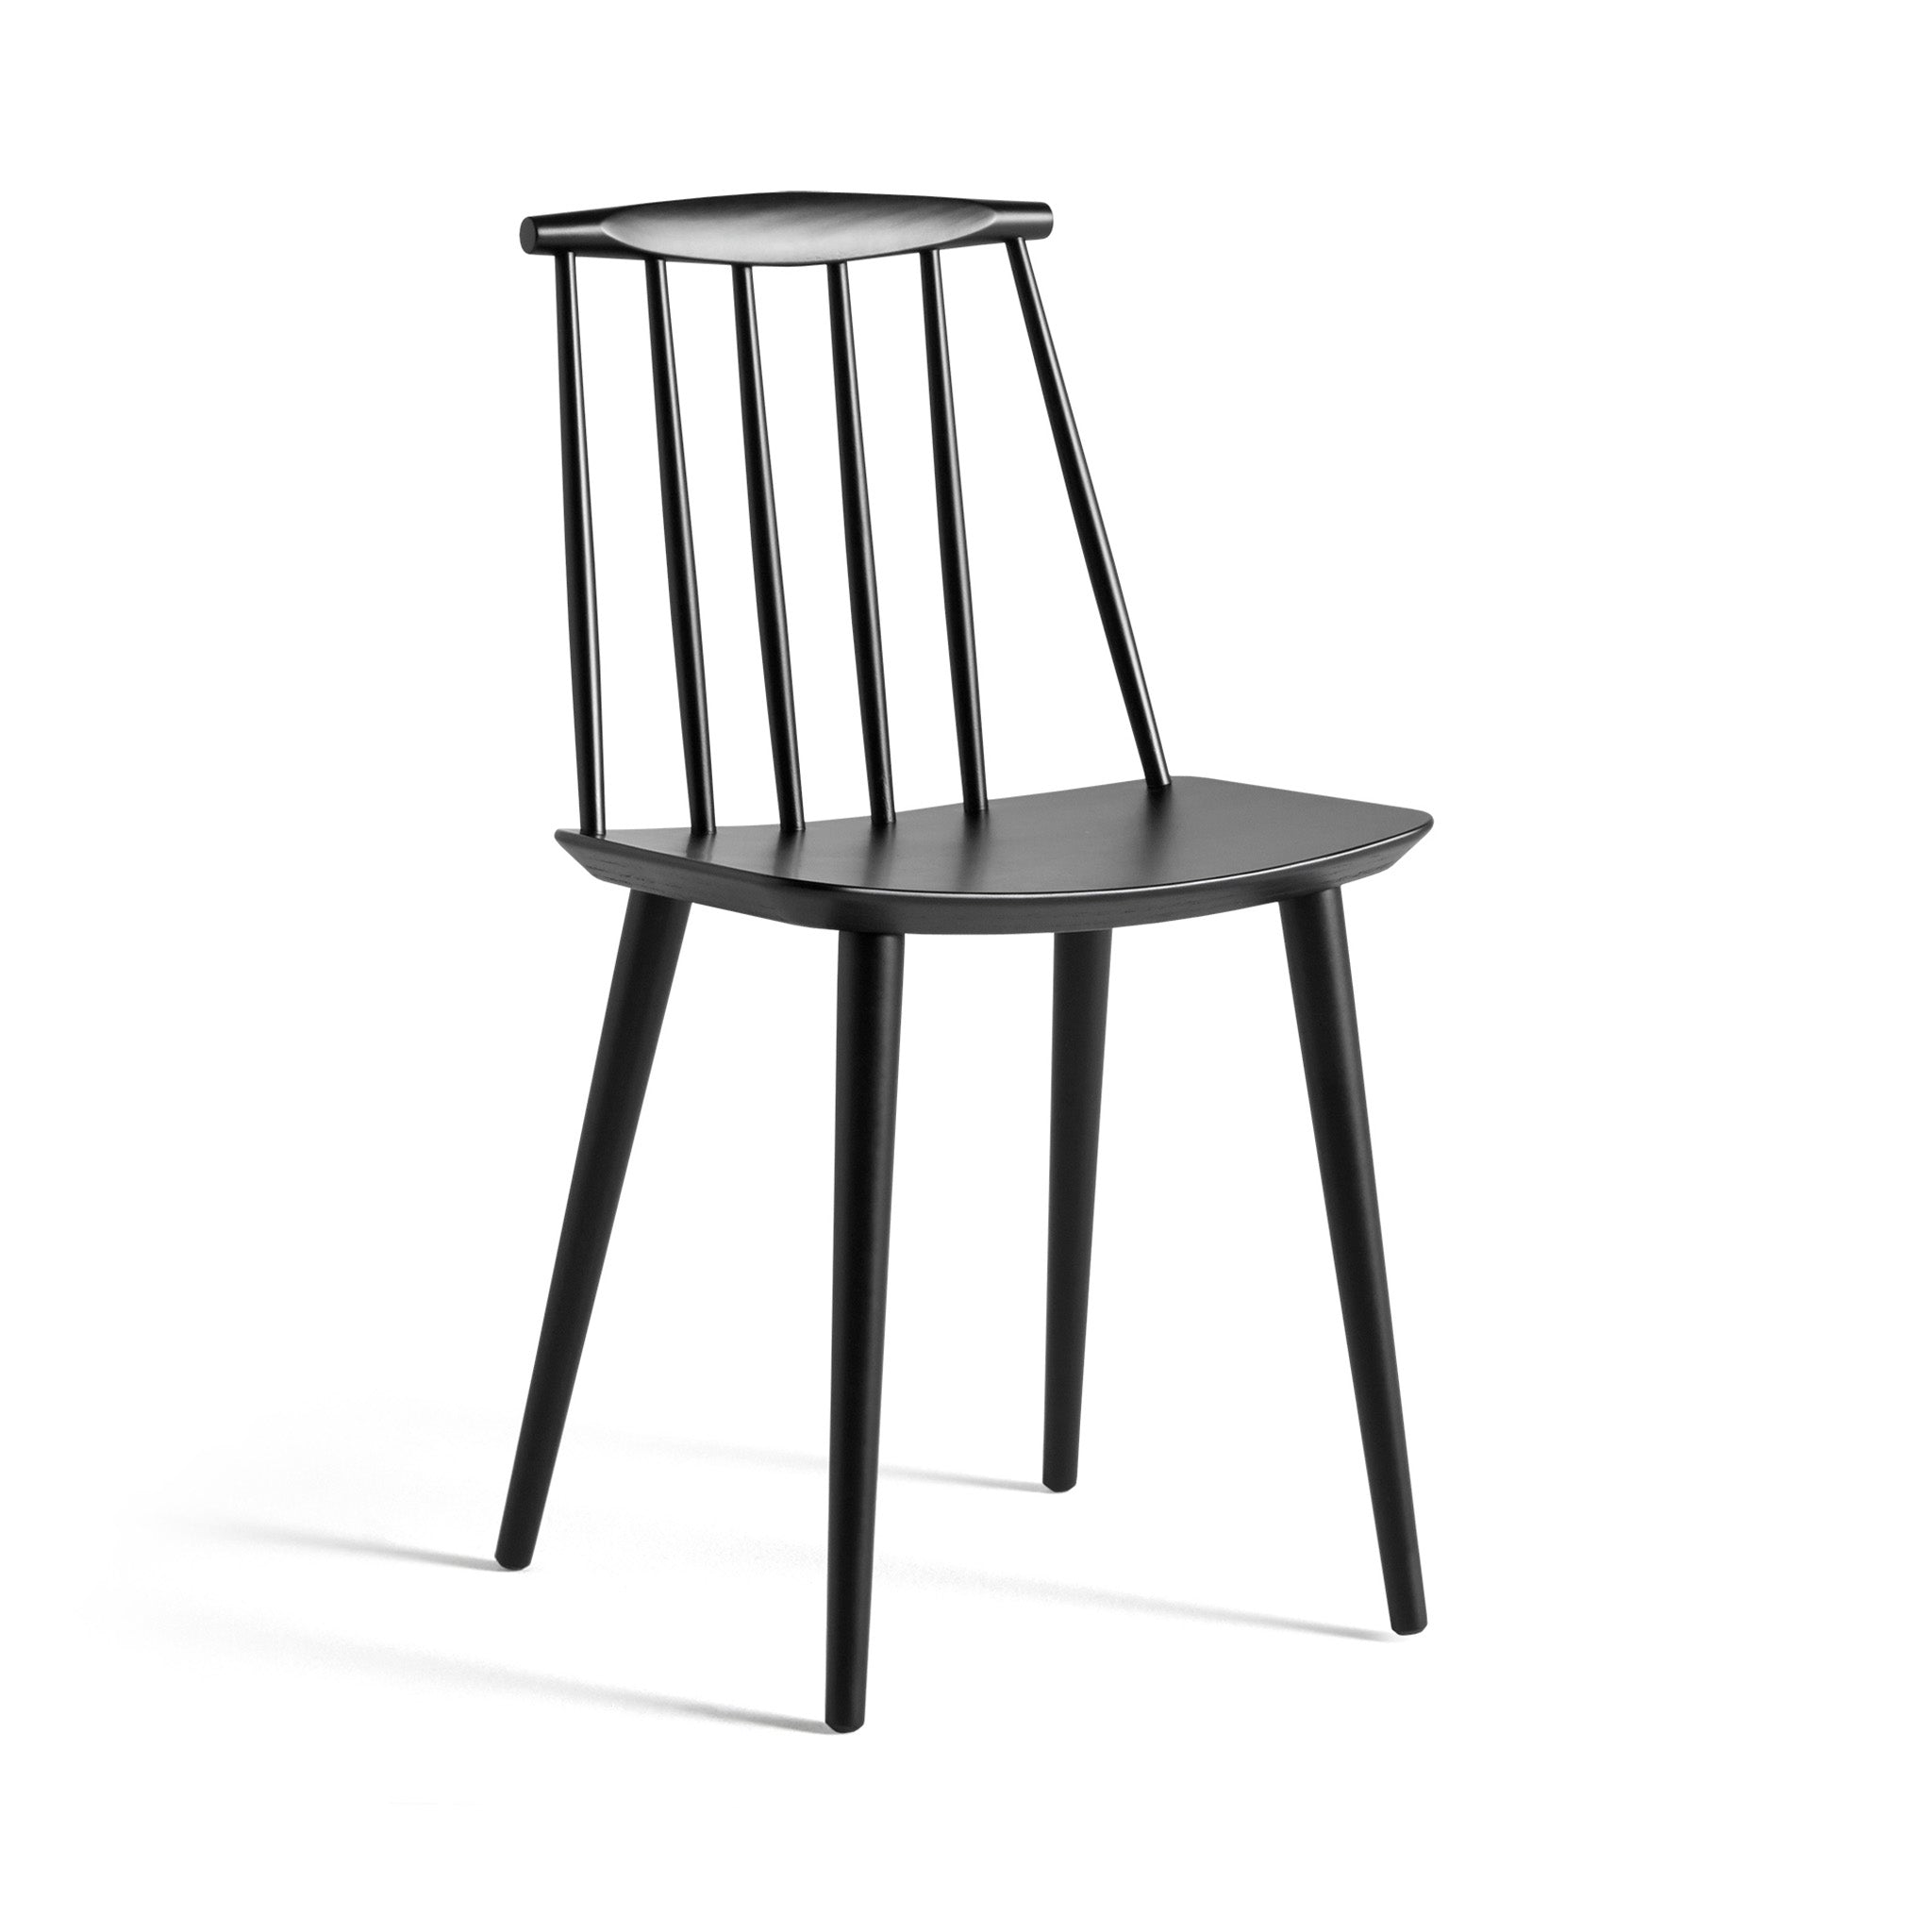 J77 Chair By Folke Pålsson For Hay